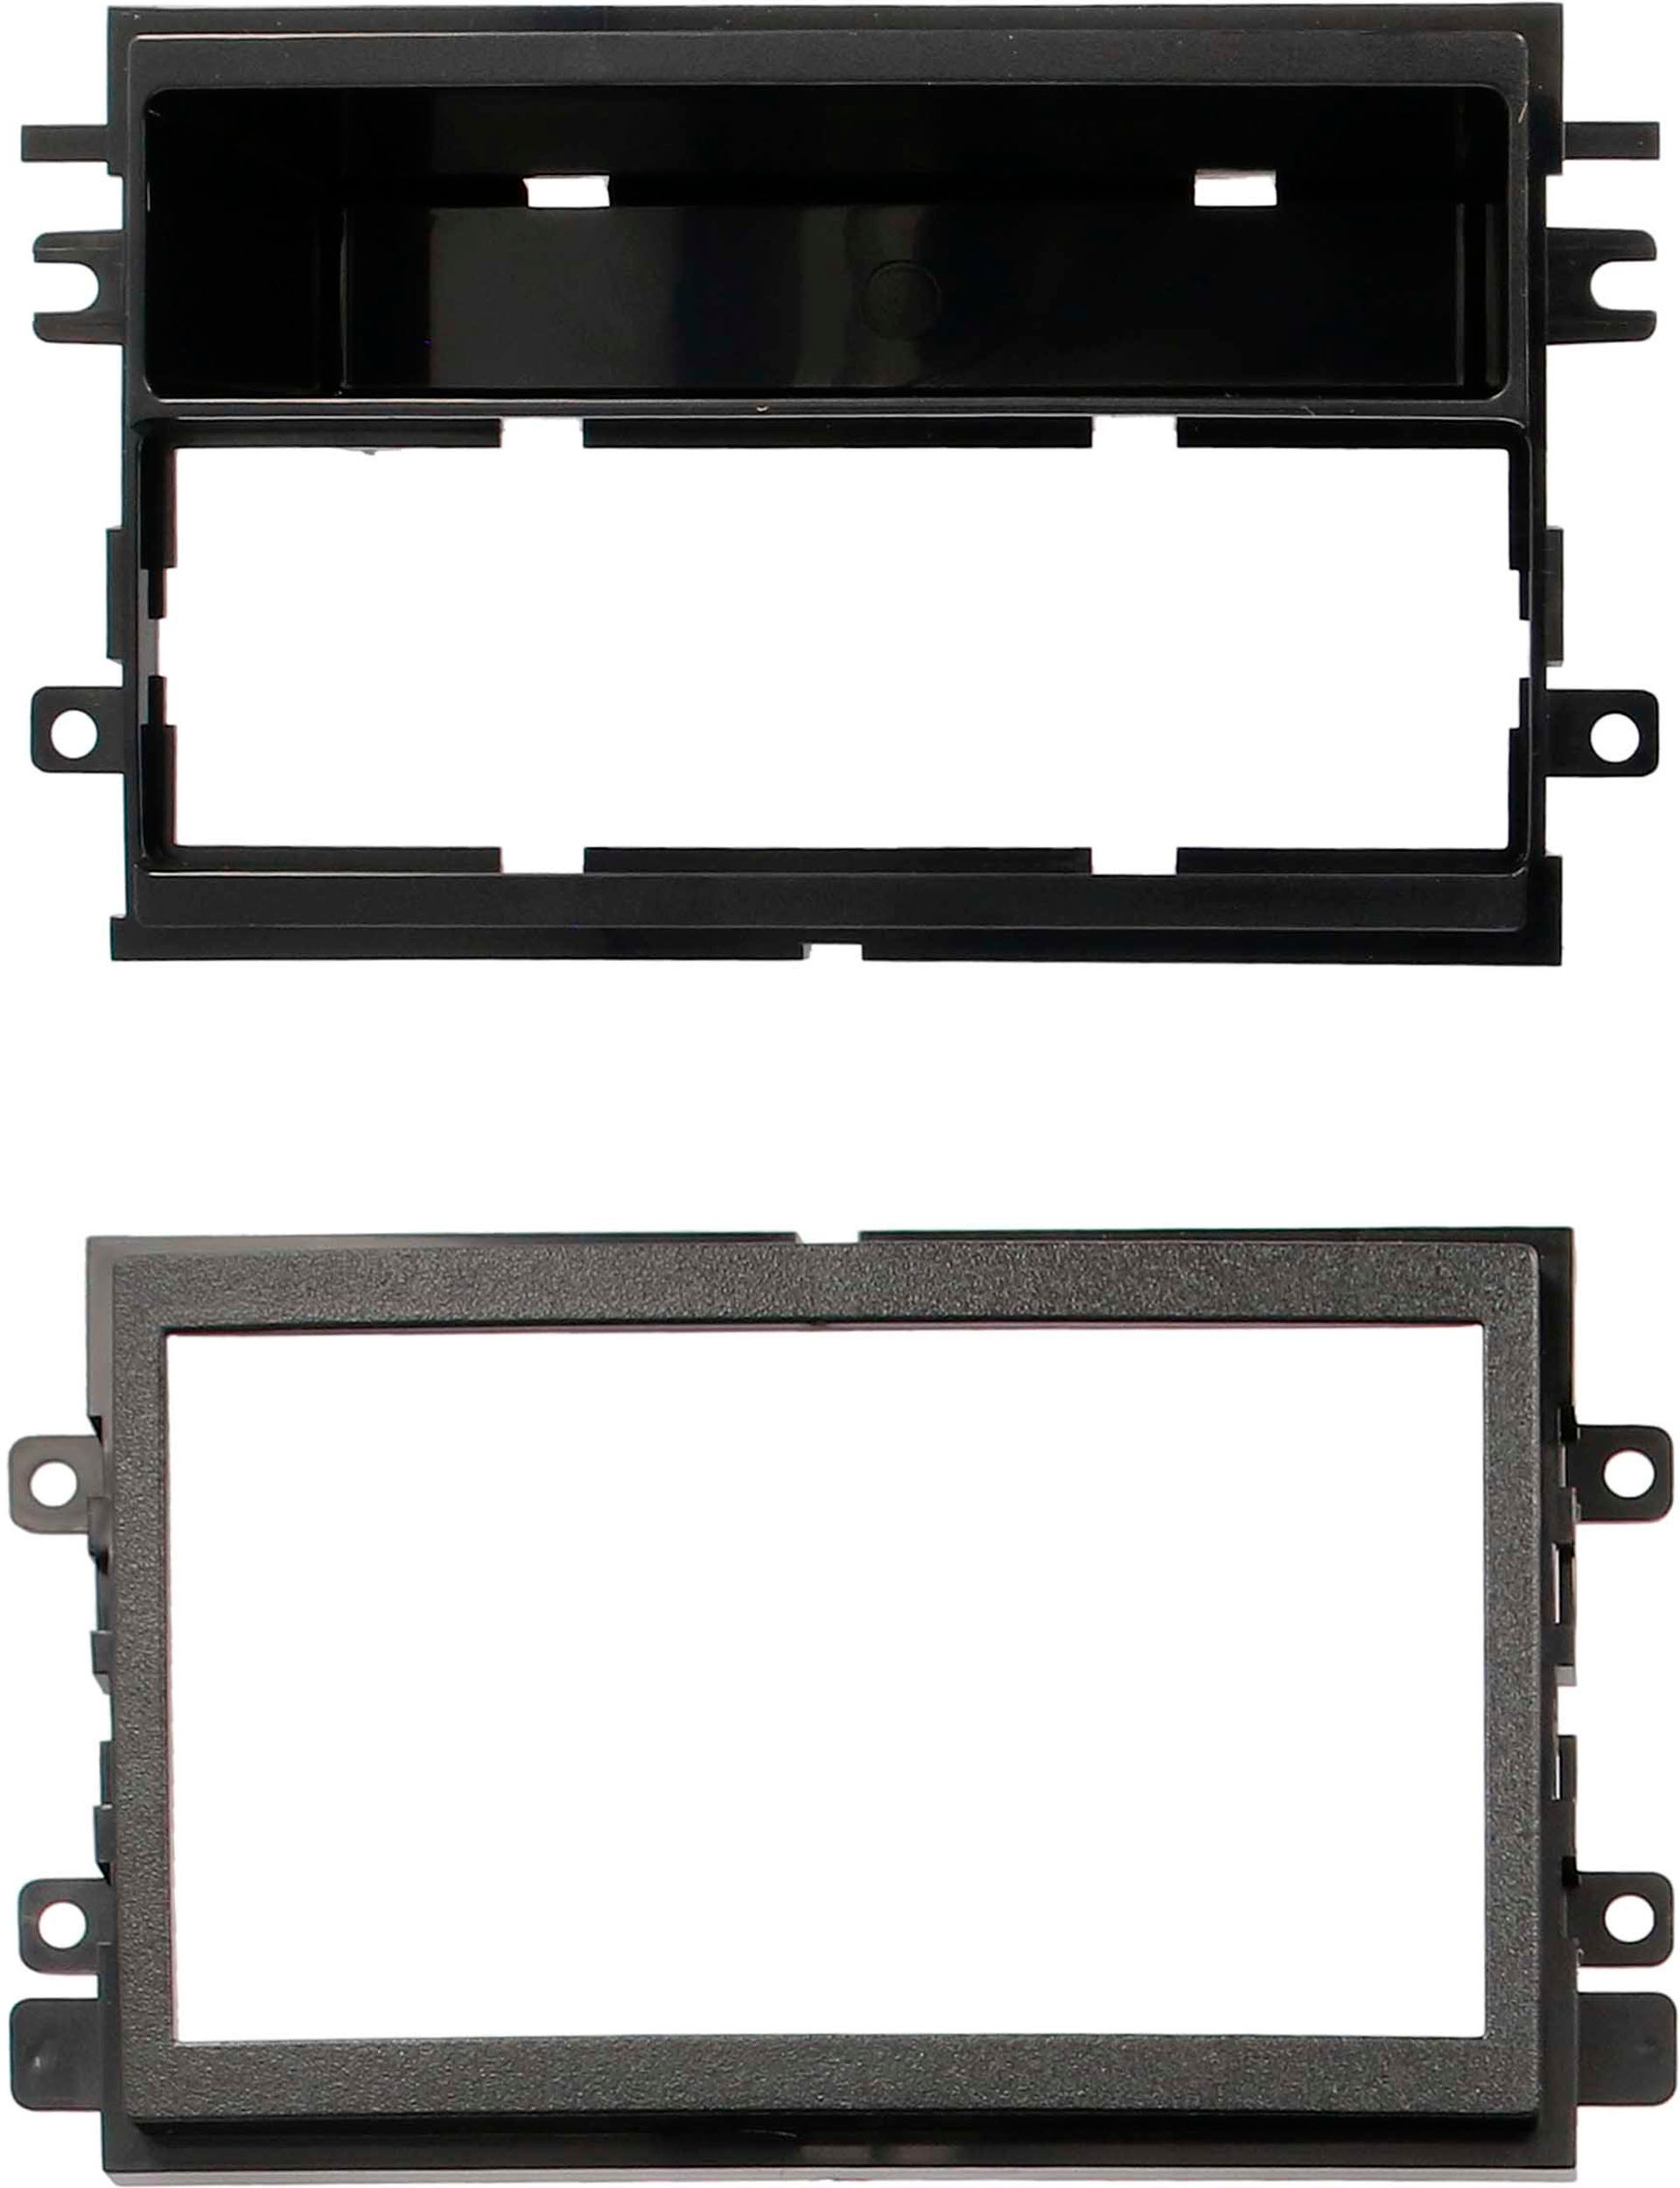 Lincoln Mercury95-5812 Metra Double DIN Dash Kit for Select 2004-Up Ford 